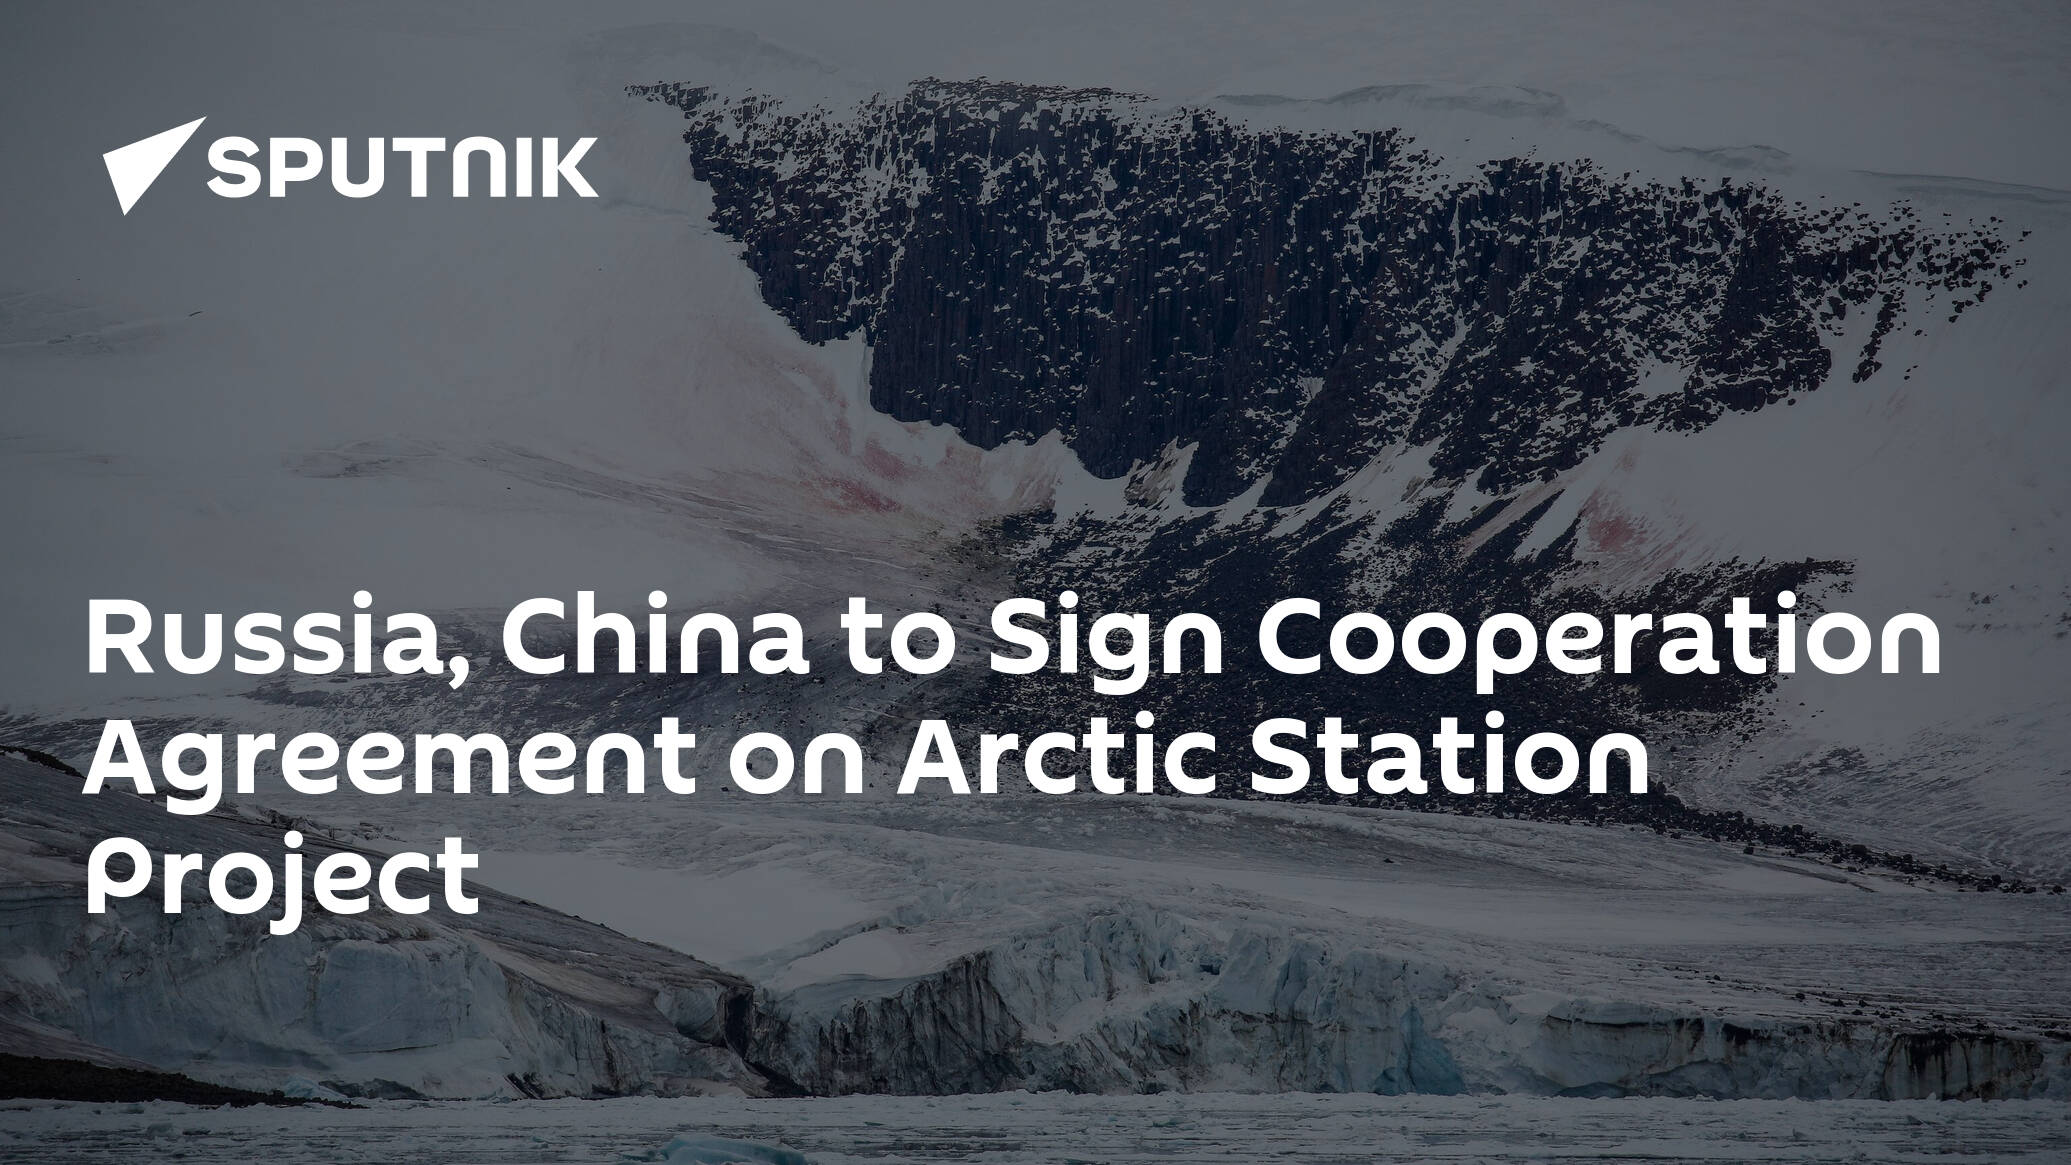 Russia, China to Sign Cooperation Agreement on Arctic Station Project